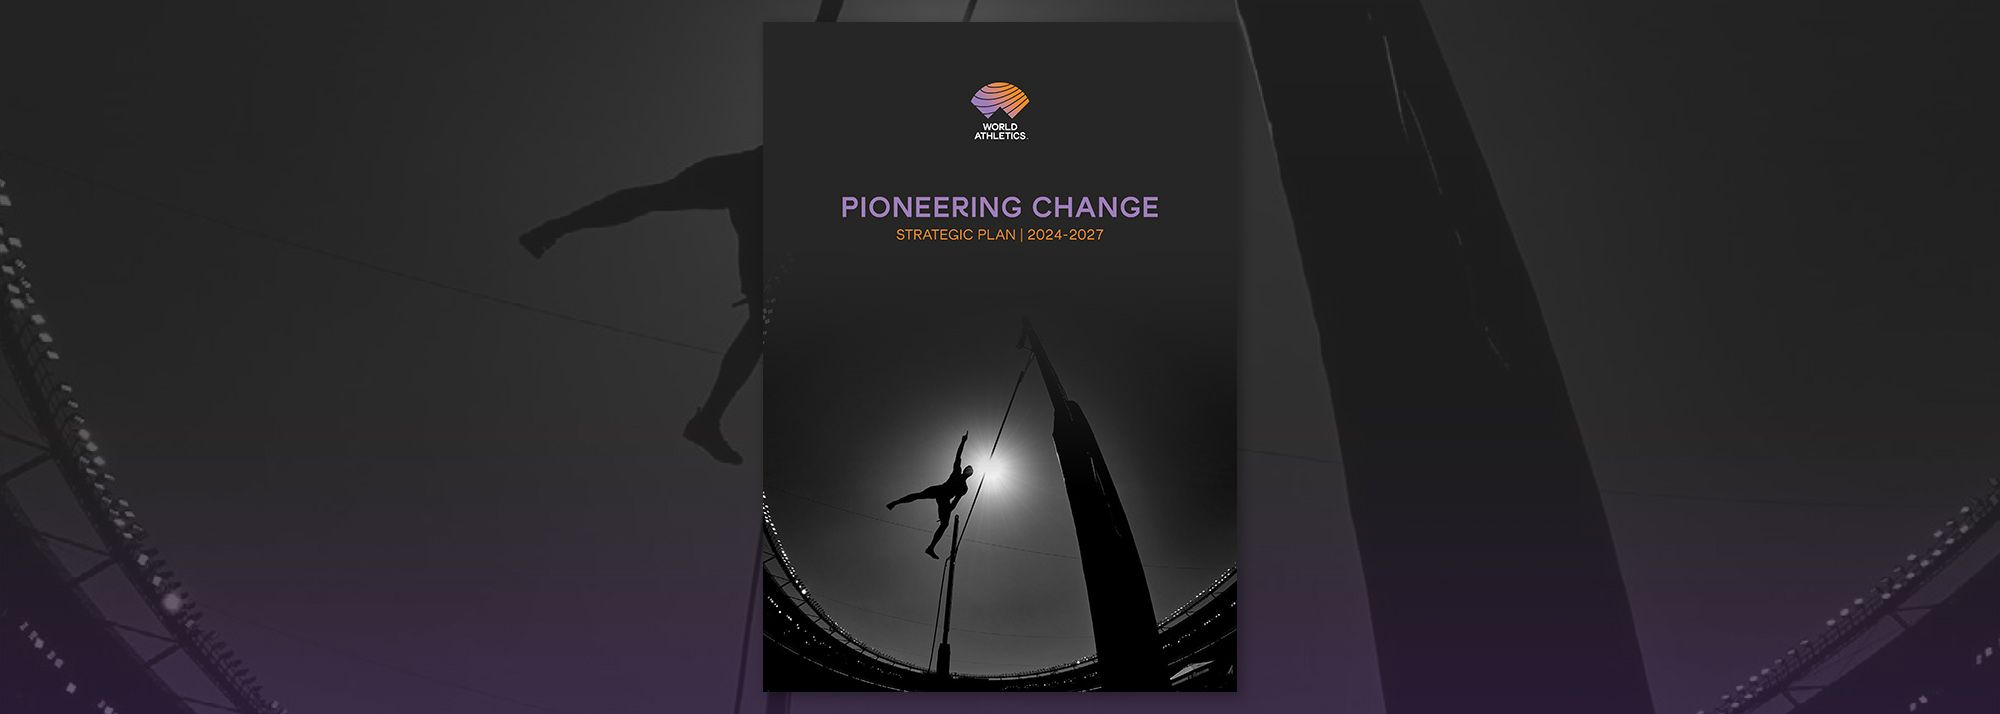 World Athletics’ four-year business strategy, Pioneering Change (2024-2027), outlines the key strategic priorities for the sport